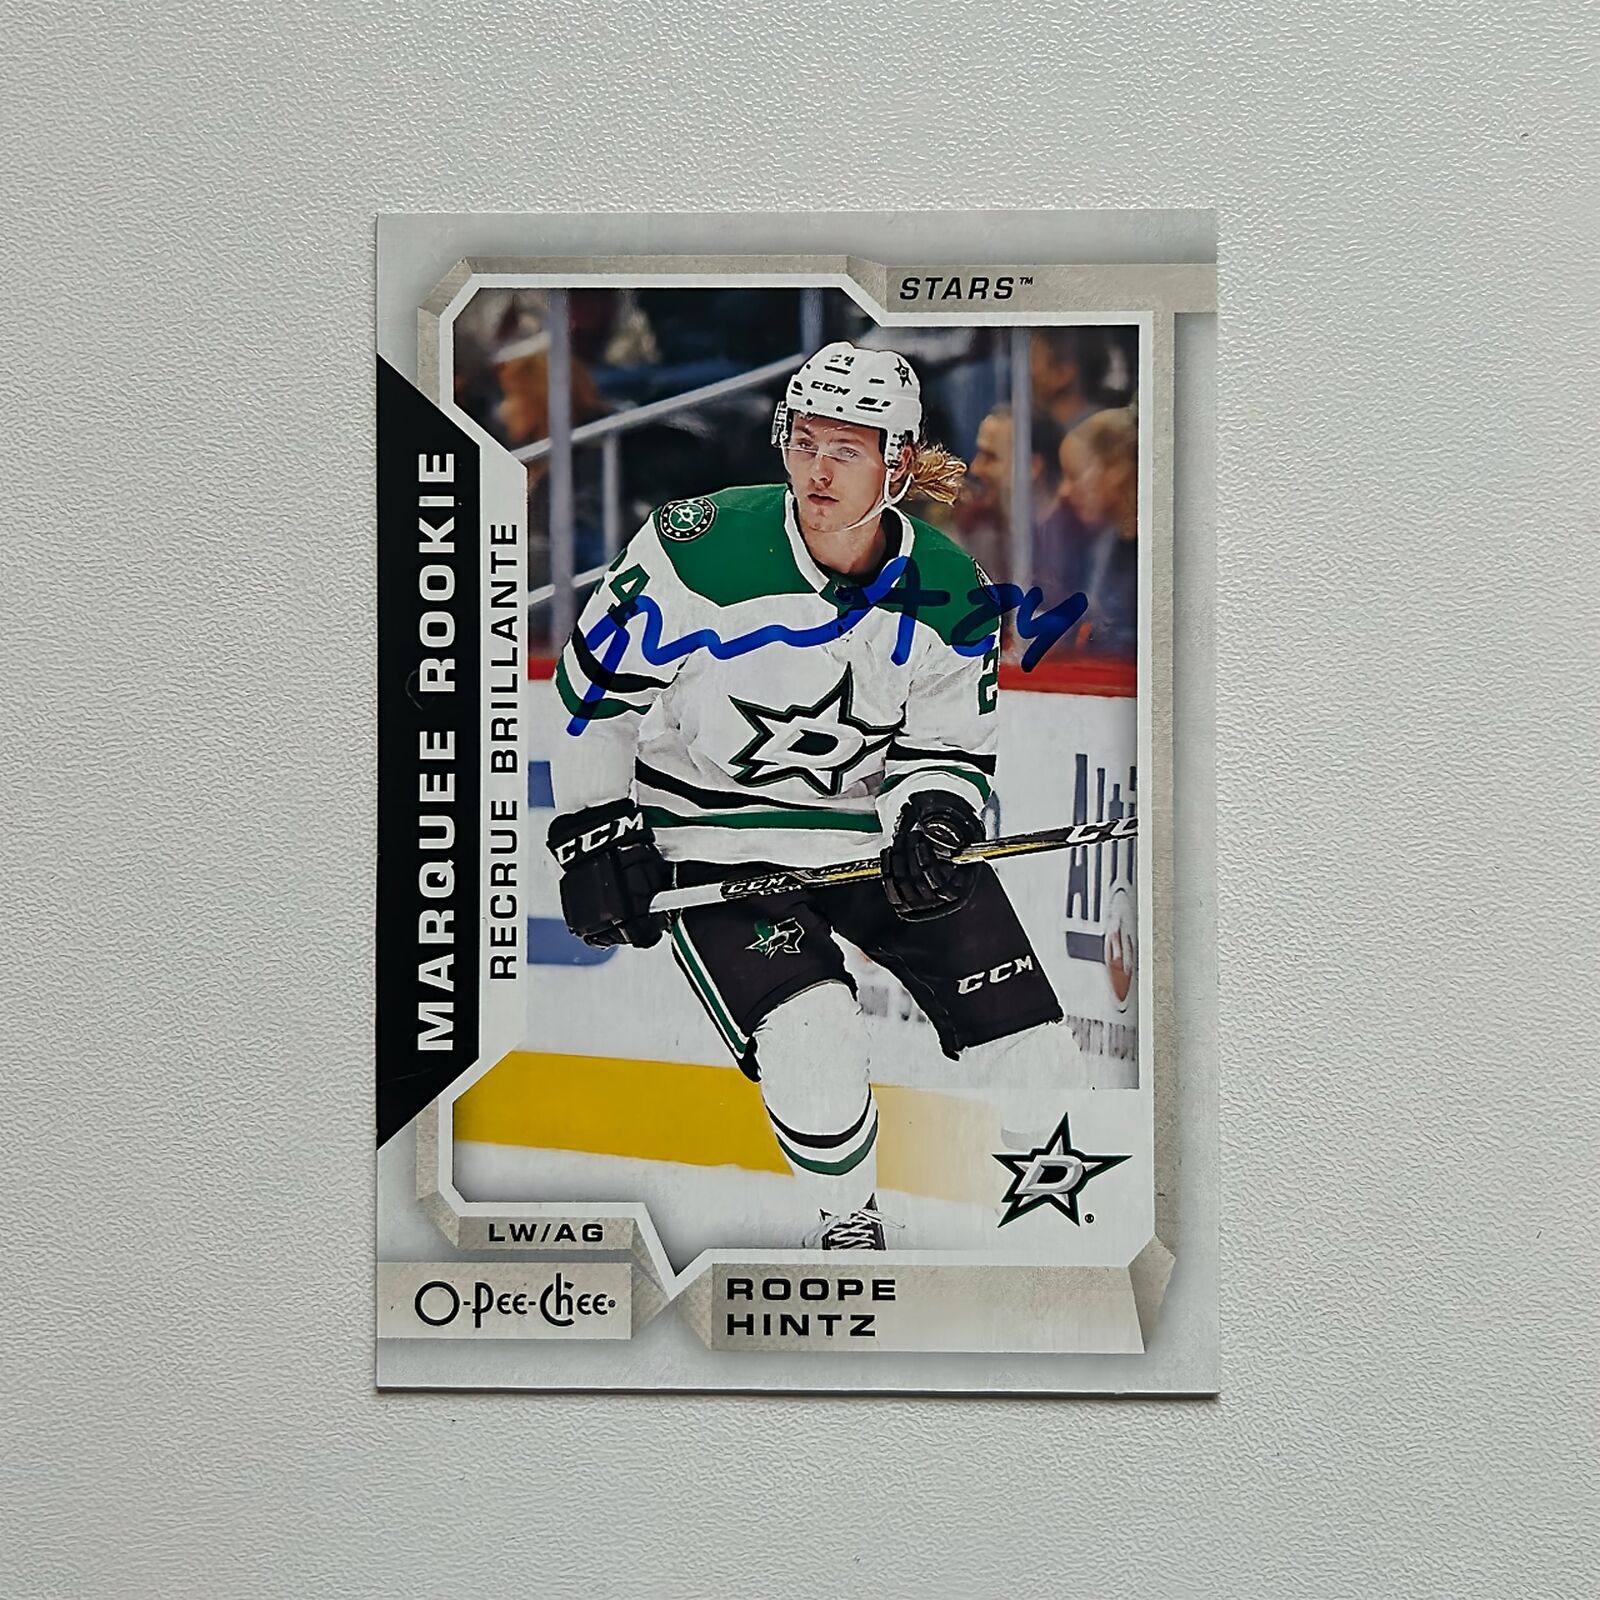 2018-19 OPC Marquee #630 ROOPE HINTZ Autographed Rookie Card